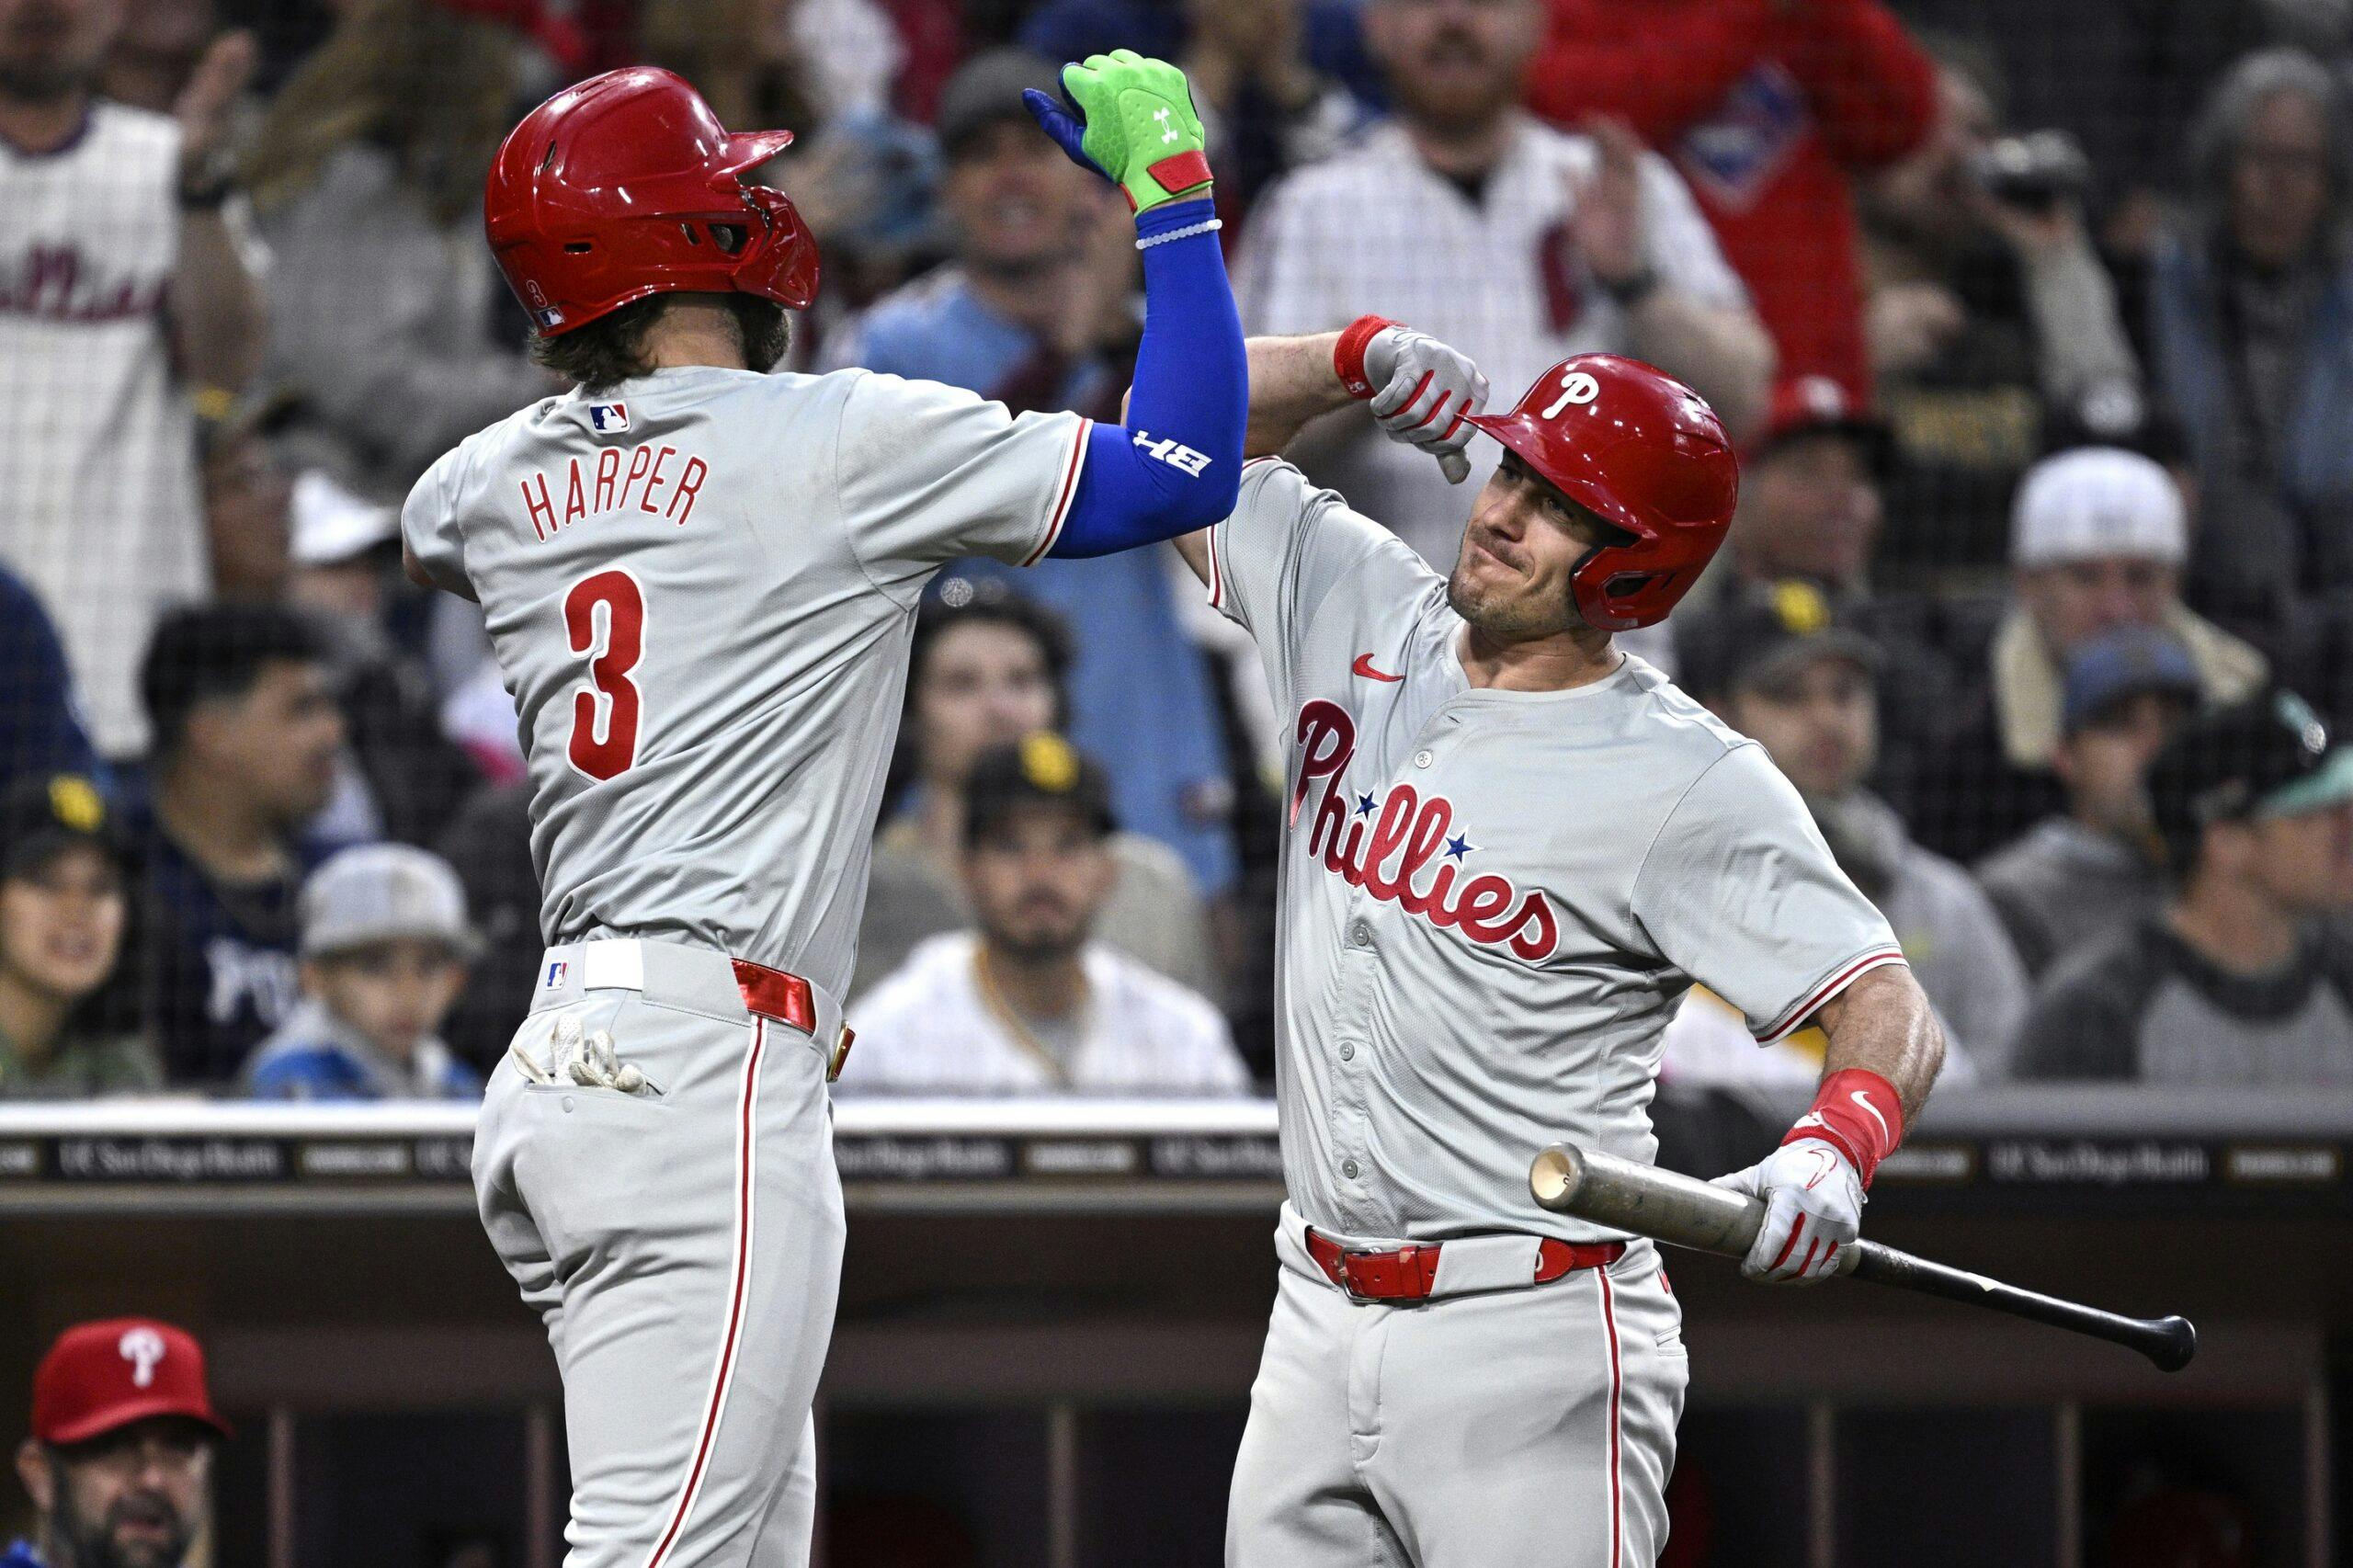 Philadelphia Phillies first baseman Bryce Harper (3) is congratulated by catcher J.T. Realmuto (10) after hitting a home run against the San Diego Padres during the third inning at Petco Park. Mandatory Credit: Orlando Ramirez-USA TODAY Sports